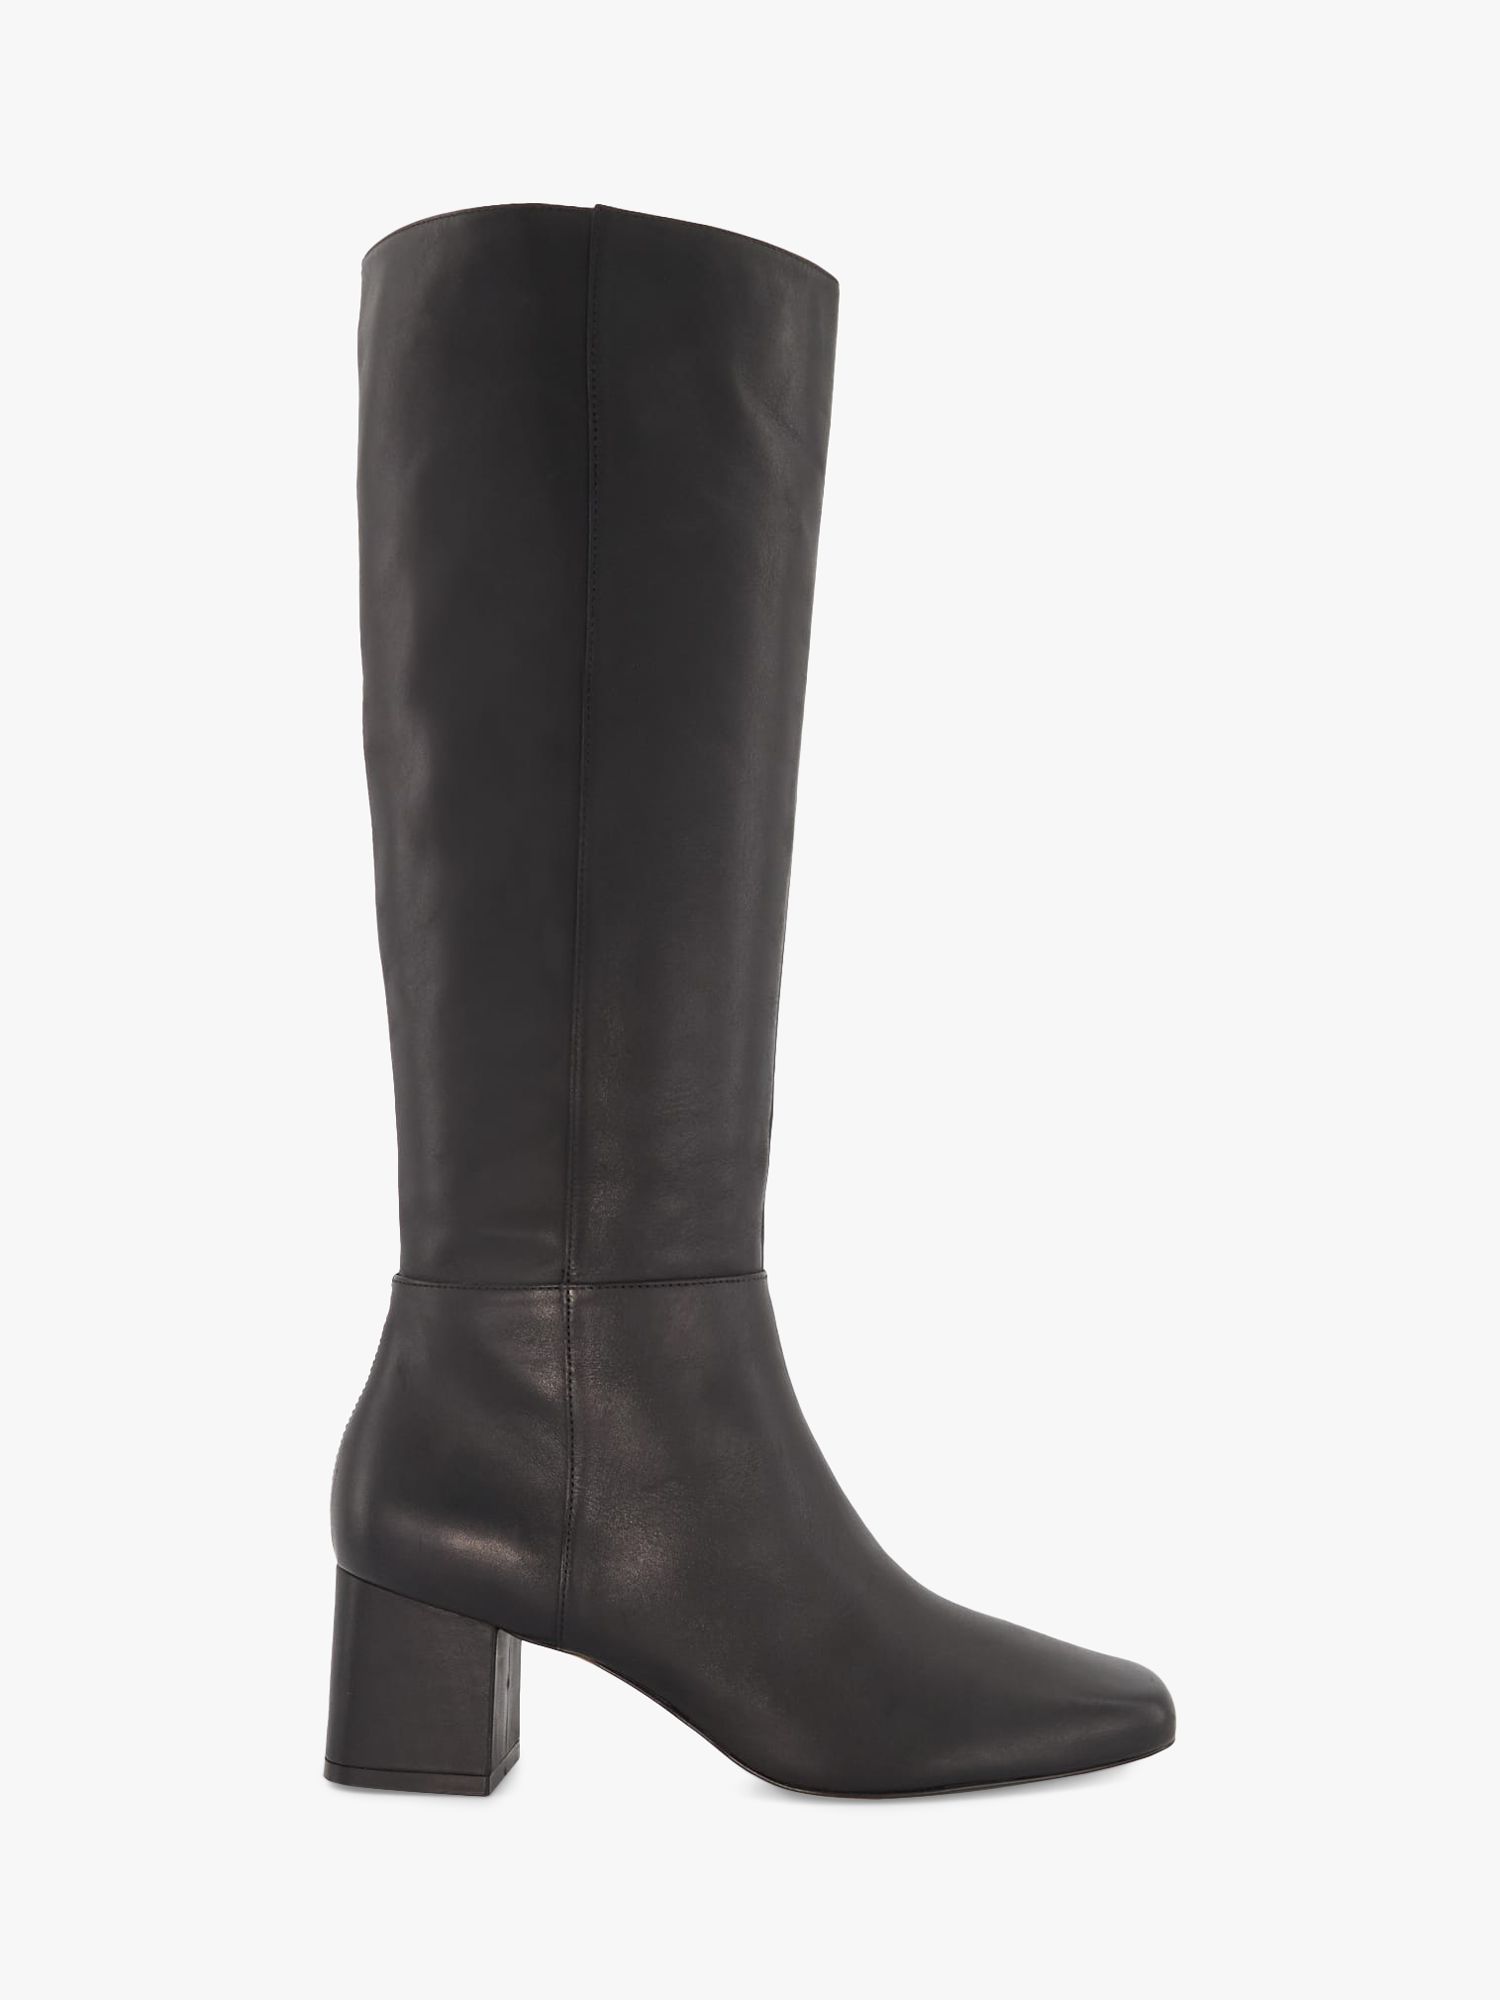 Dune Signature Leather Knee High Boots, Black at John Lewis & Partners